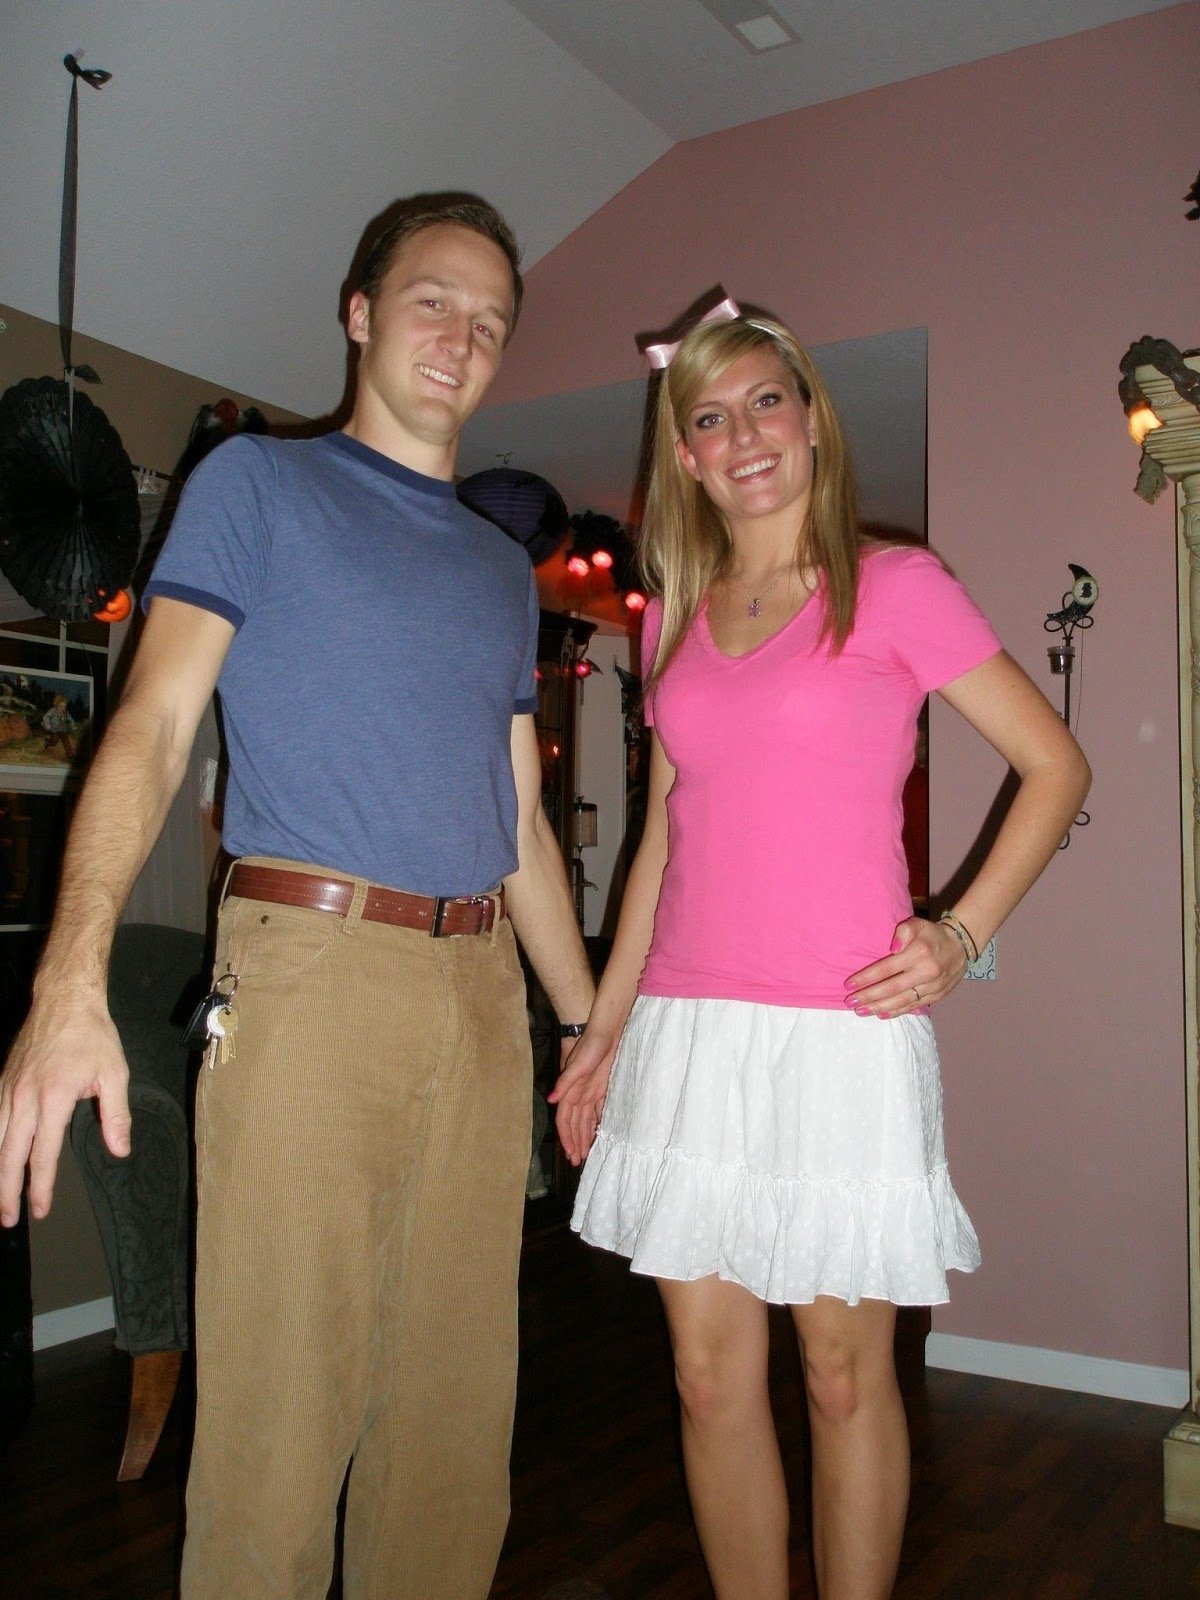 10 Attractive Clever Halloween Costume Ideas Couples 57 couples diy costumes top 10 tuesdays funny costumes halloween 6 2022